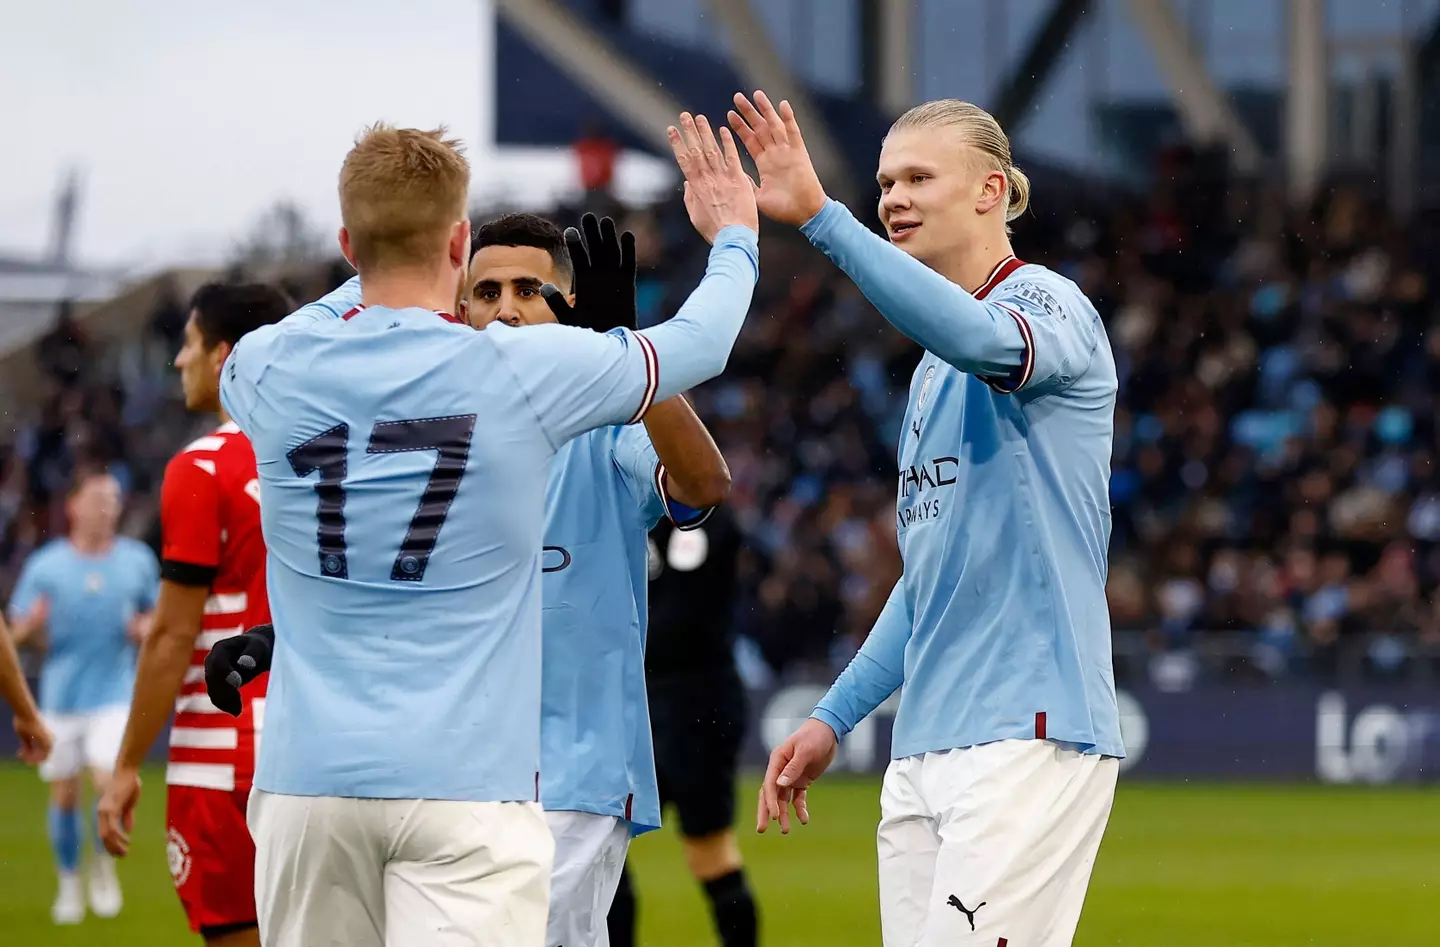 Kevin De Bruyne and Erling Haaland have struck up a key connection for Manchester City.